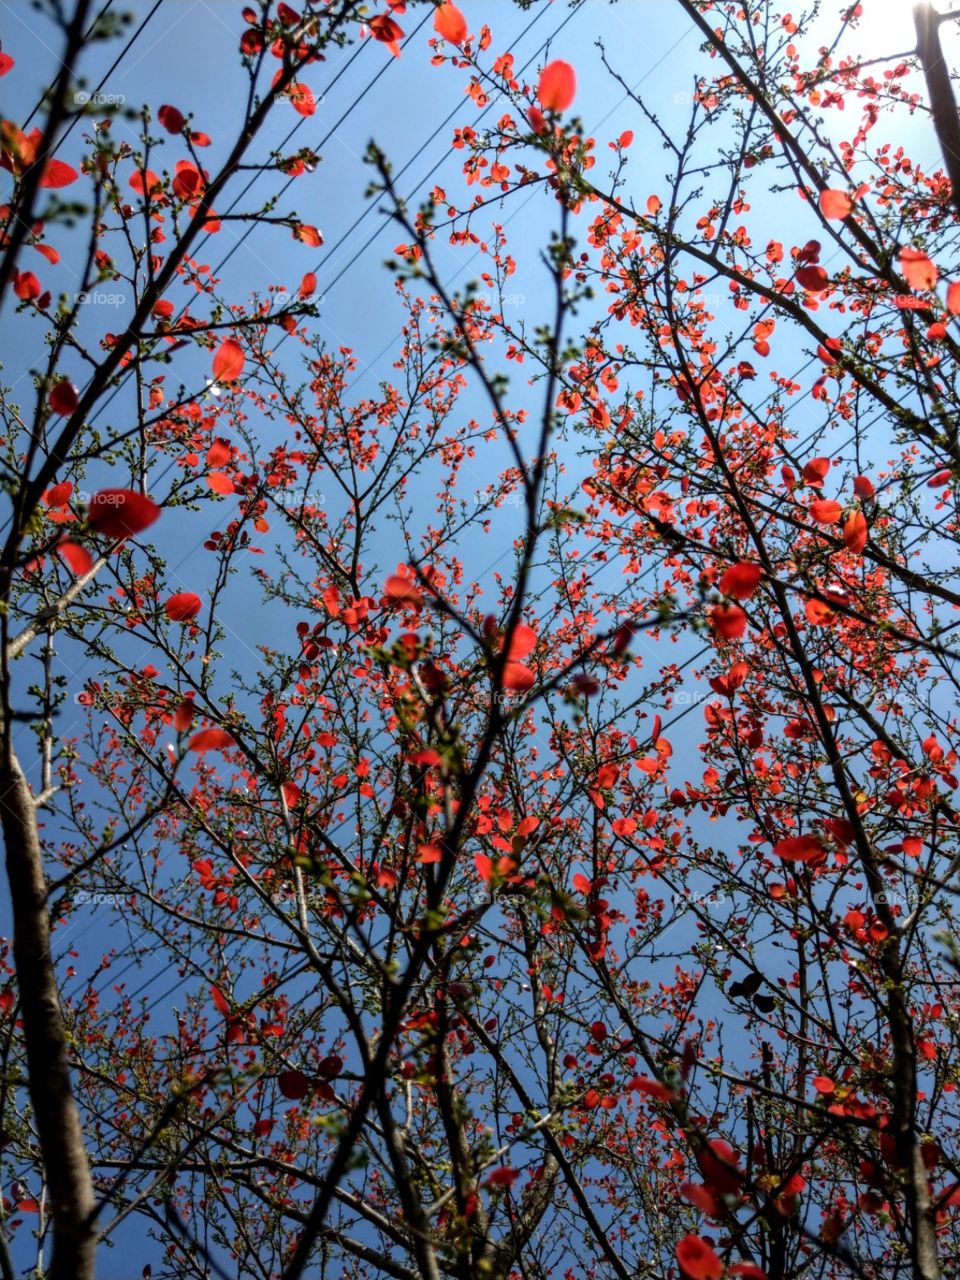 The tree covered with young red leaves in spring, a bit strange but very beautiful under the blue sky.